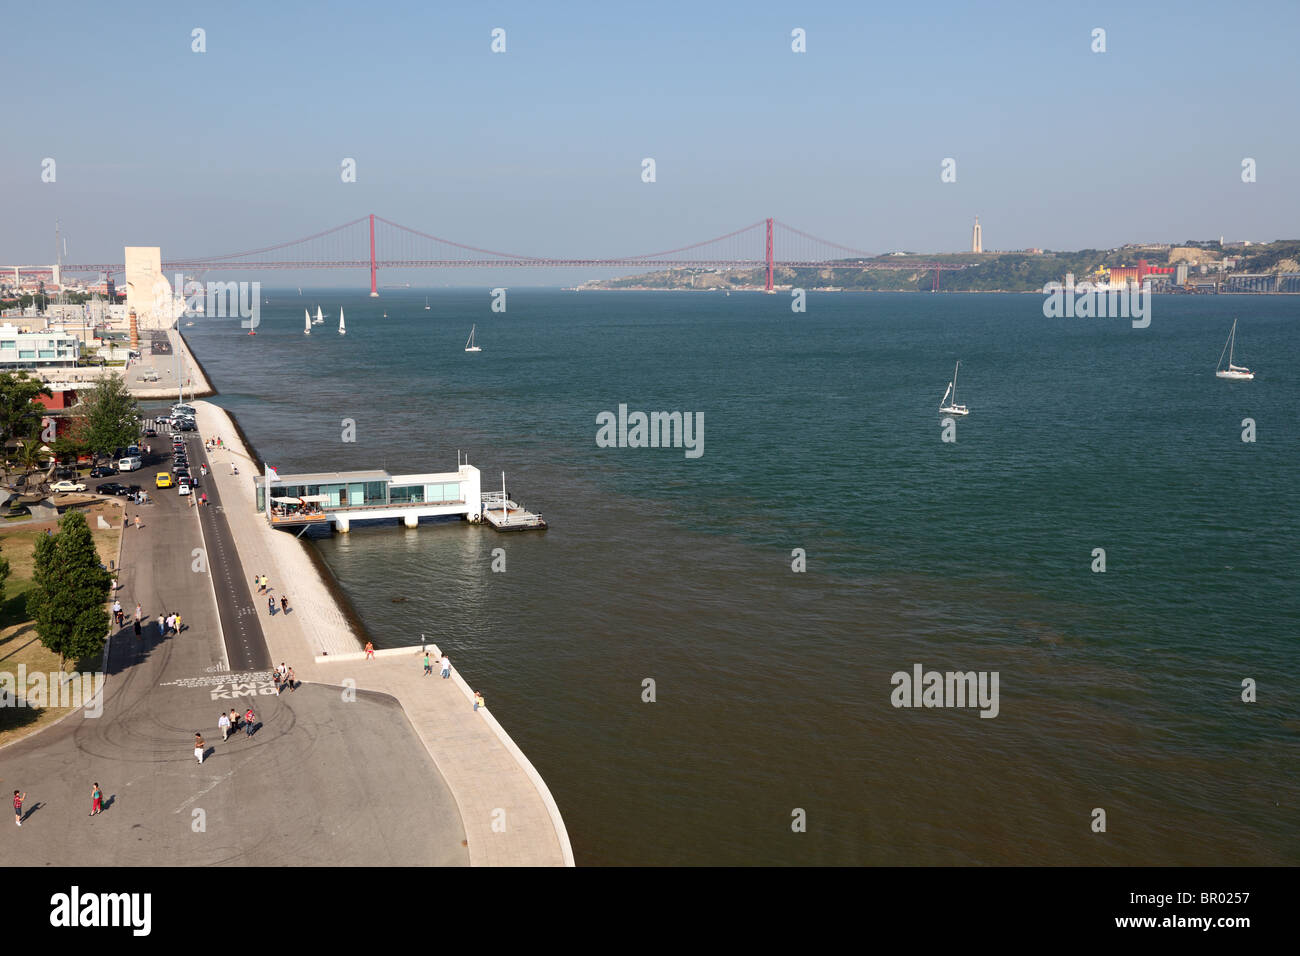 View over the Tagus River from Belem Tower in Lisbon, Portugal Stock Photo